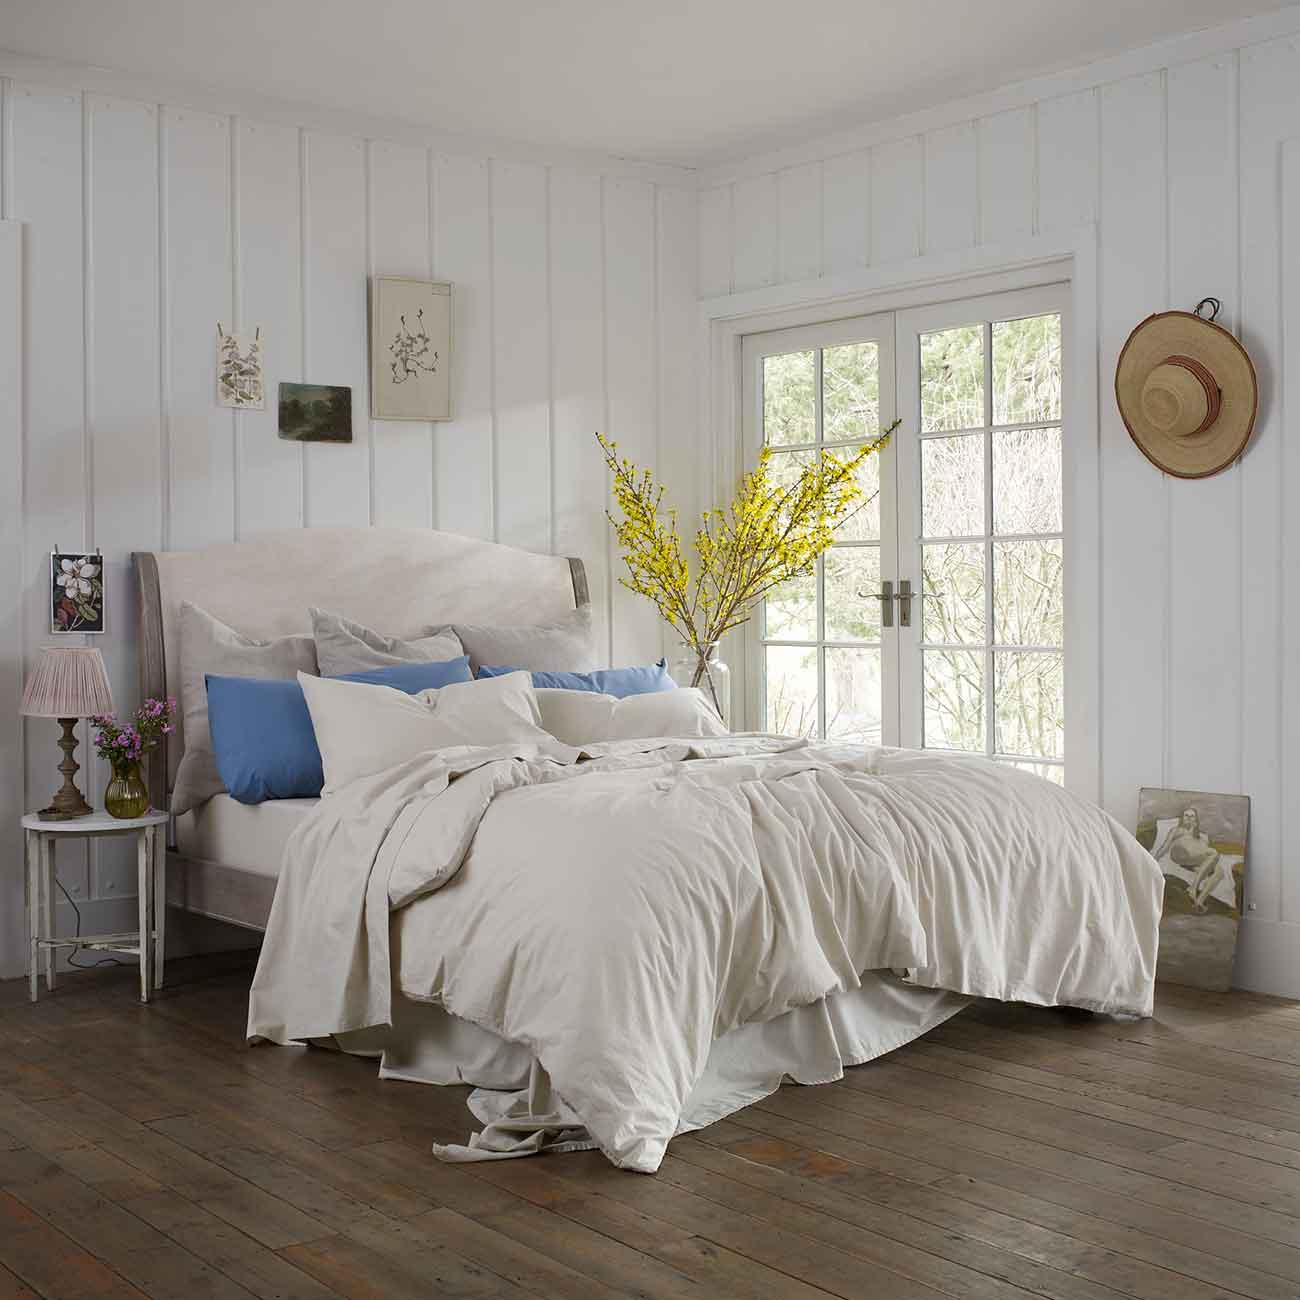 Parchment and Cove Blue Washed Cotton Percale Bedding